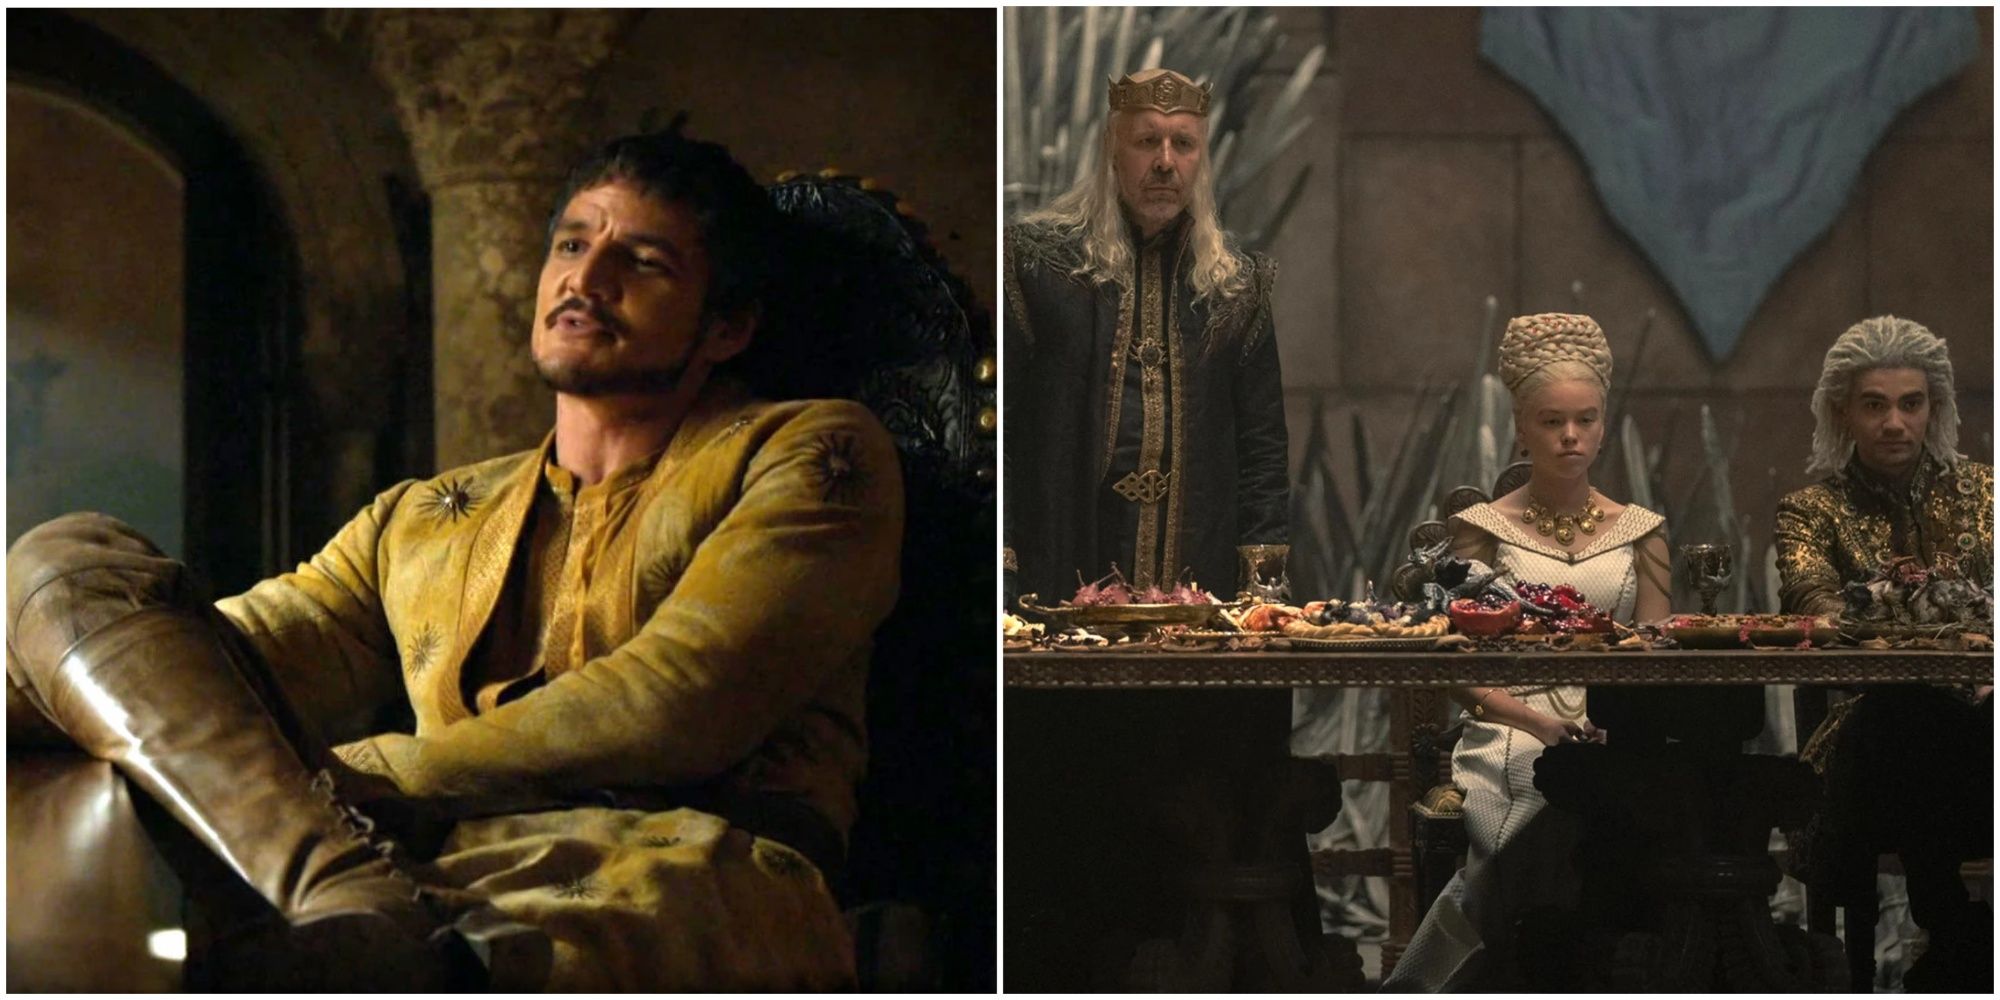 Split image of Pedro Pascal As Oberyn Martell in Game of Thrones and Viserys Rhaenyra and Laenor Velaryon House of the Dragon.